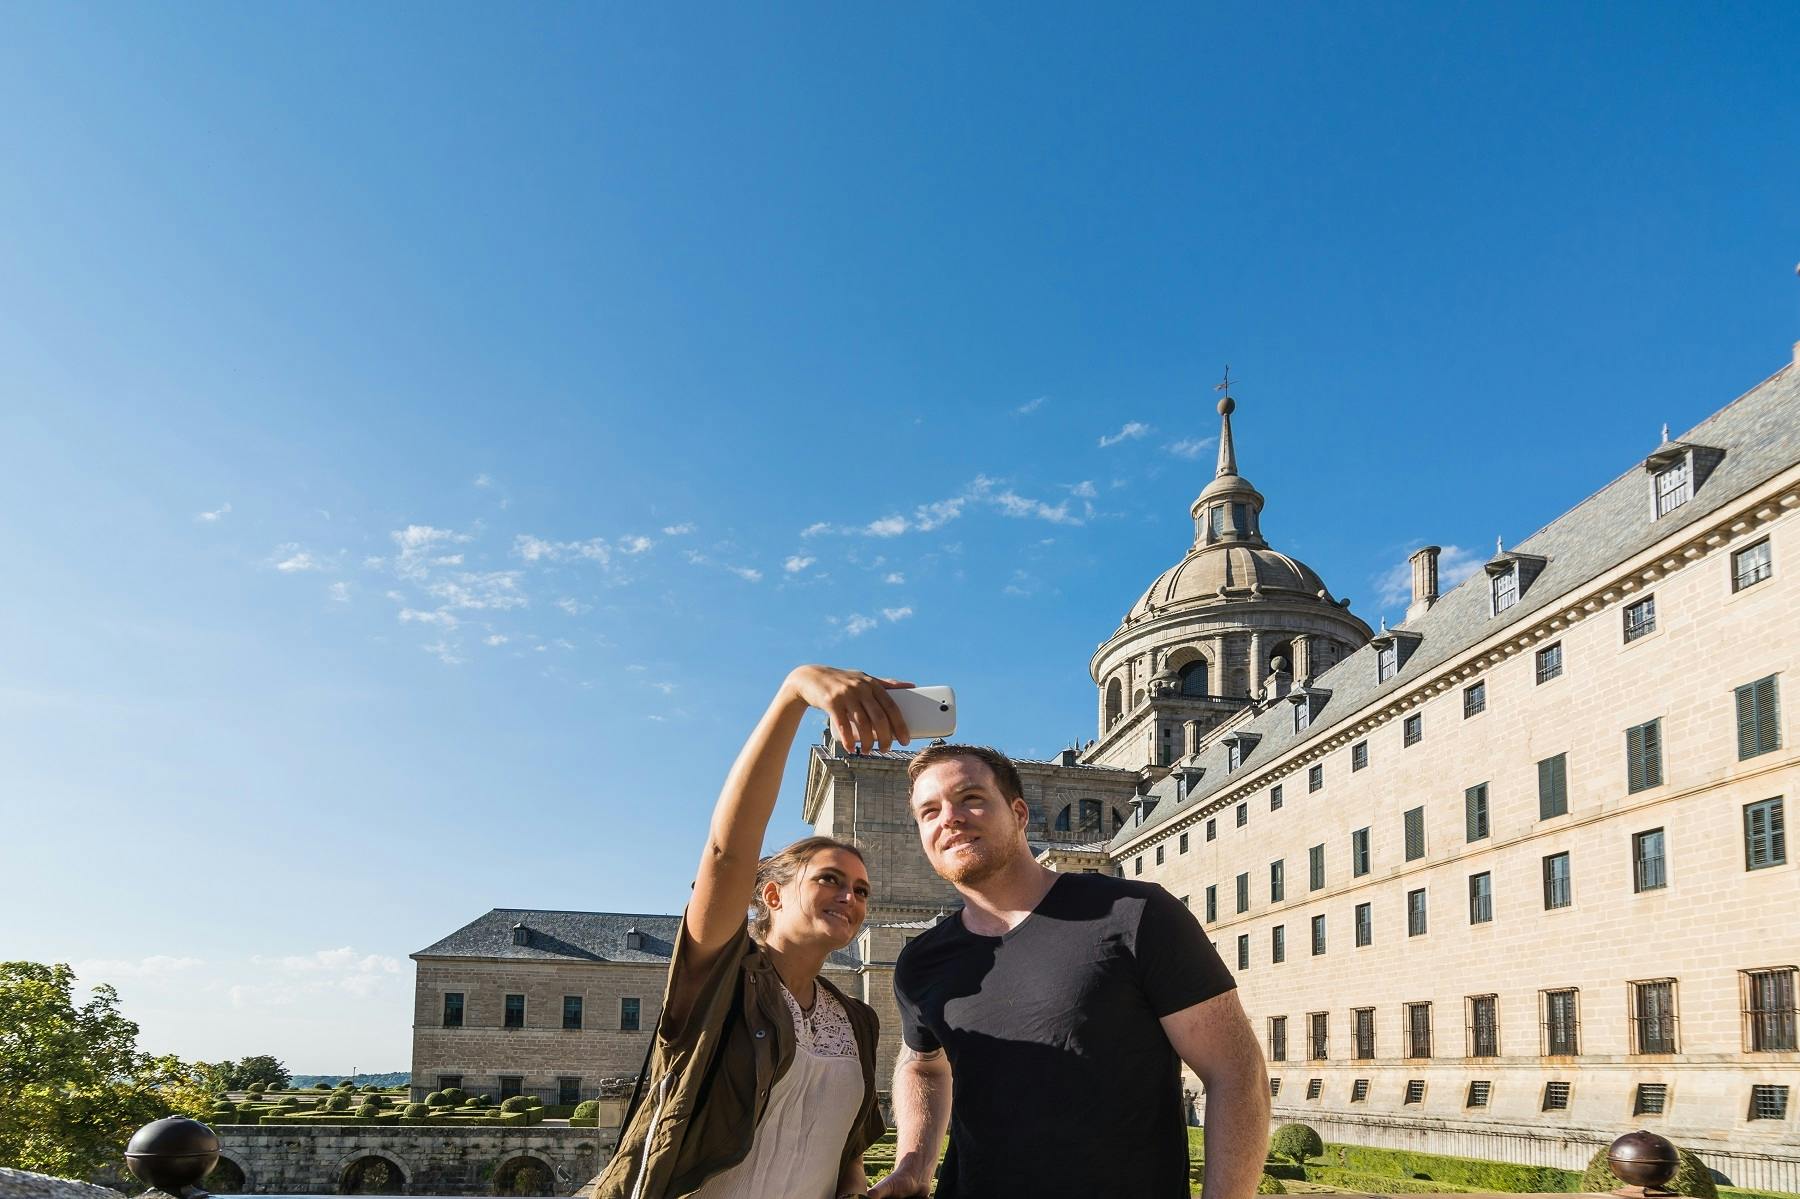 Royal Monastery of El Escorial and the Valley Fallen trip from